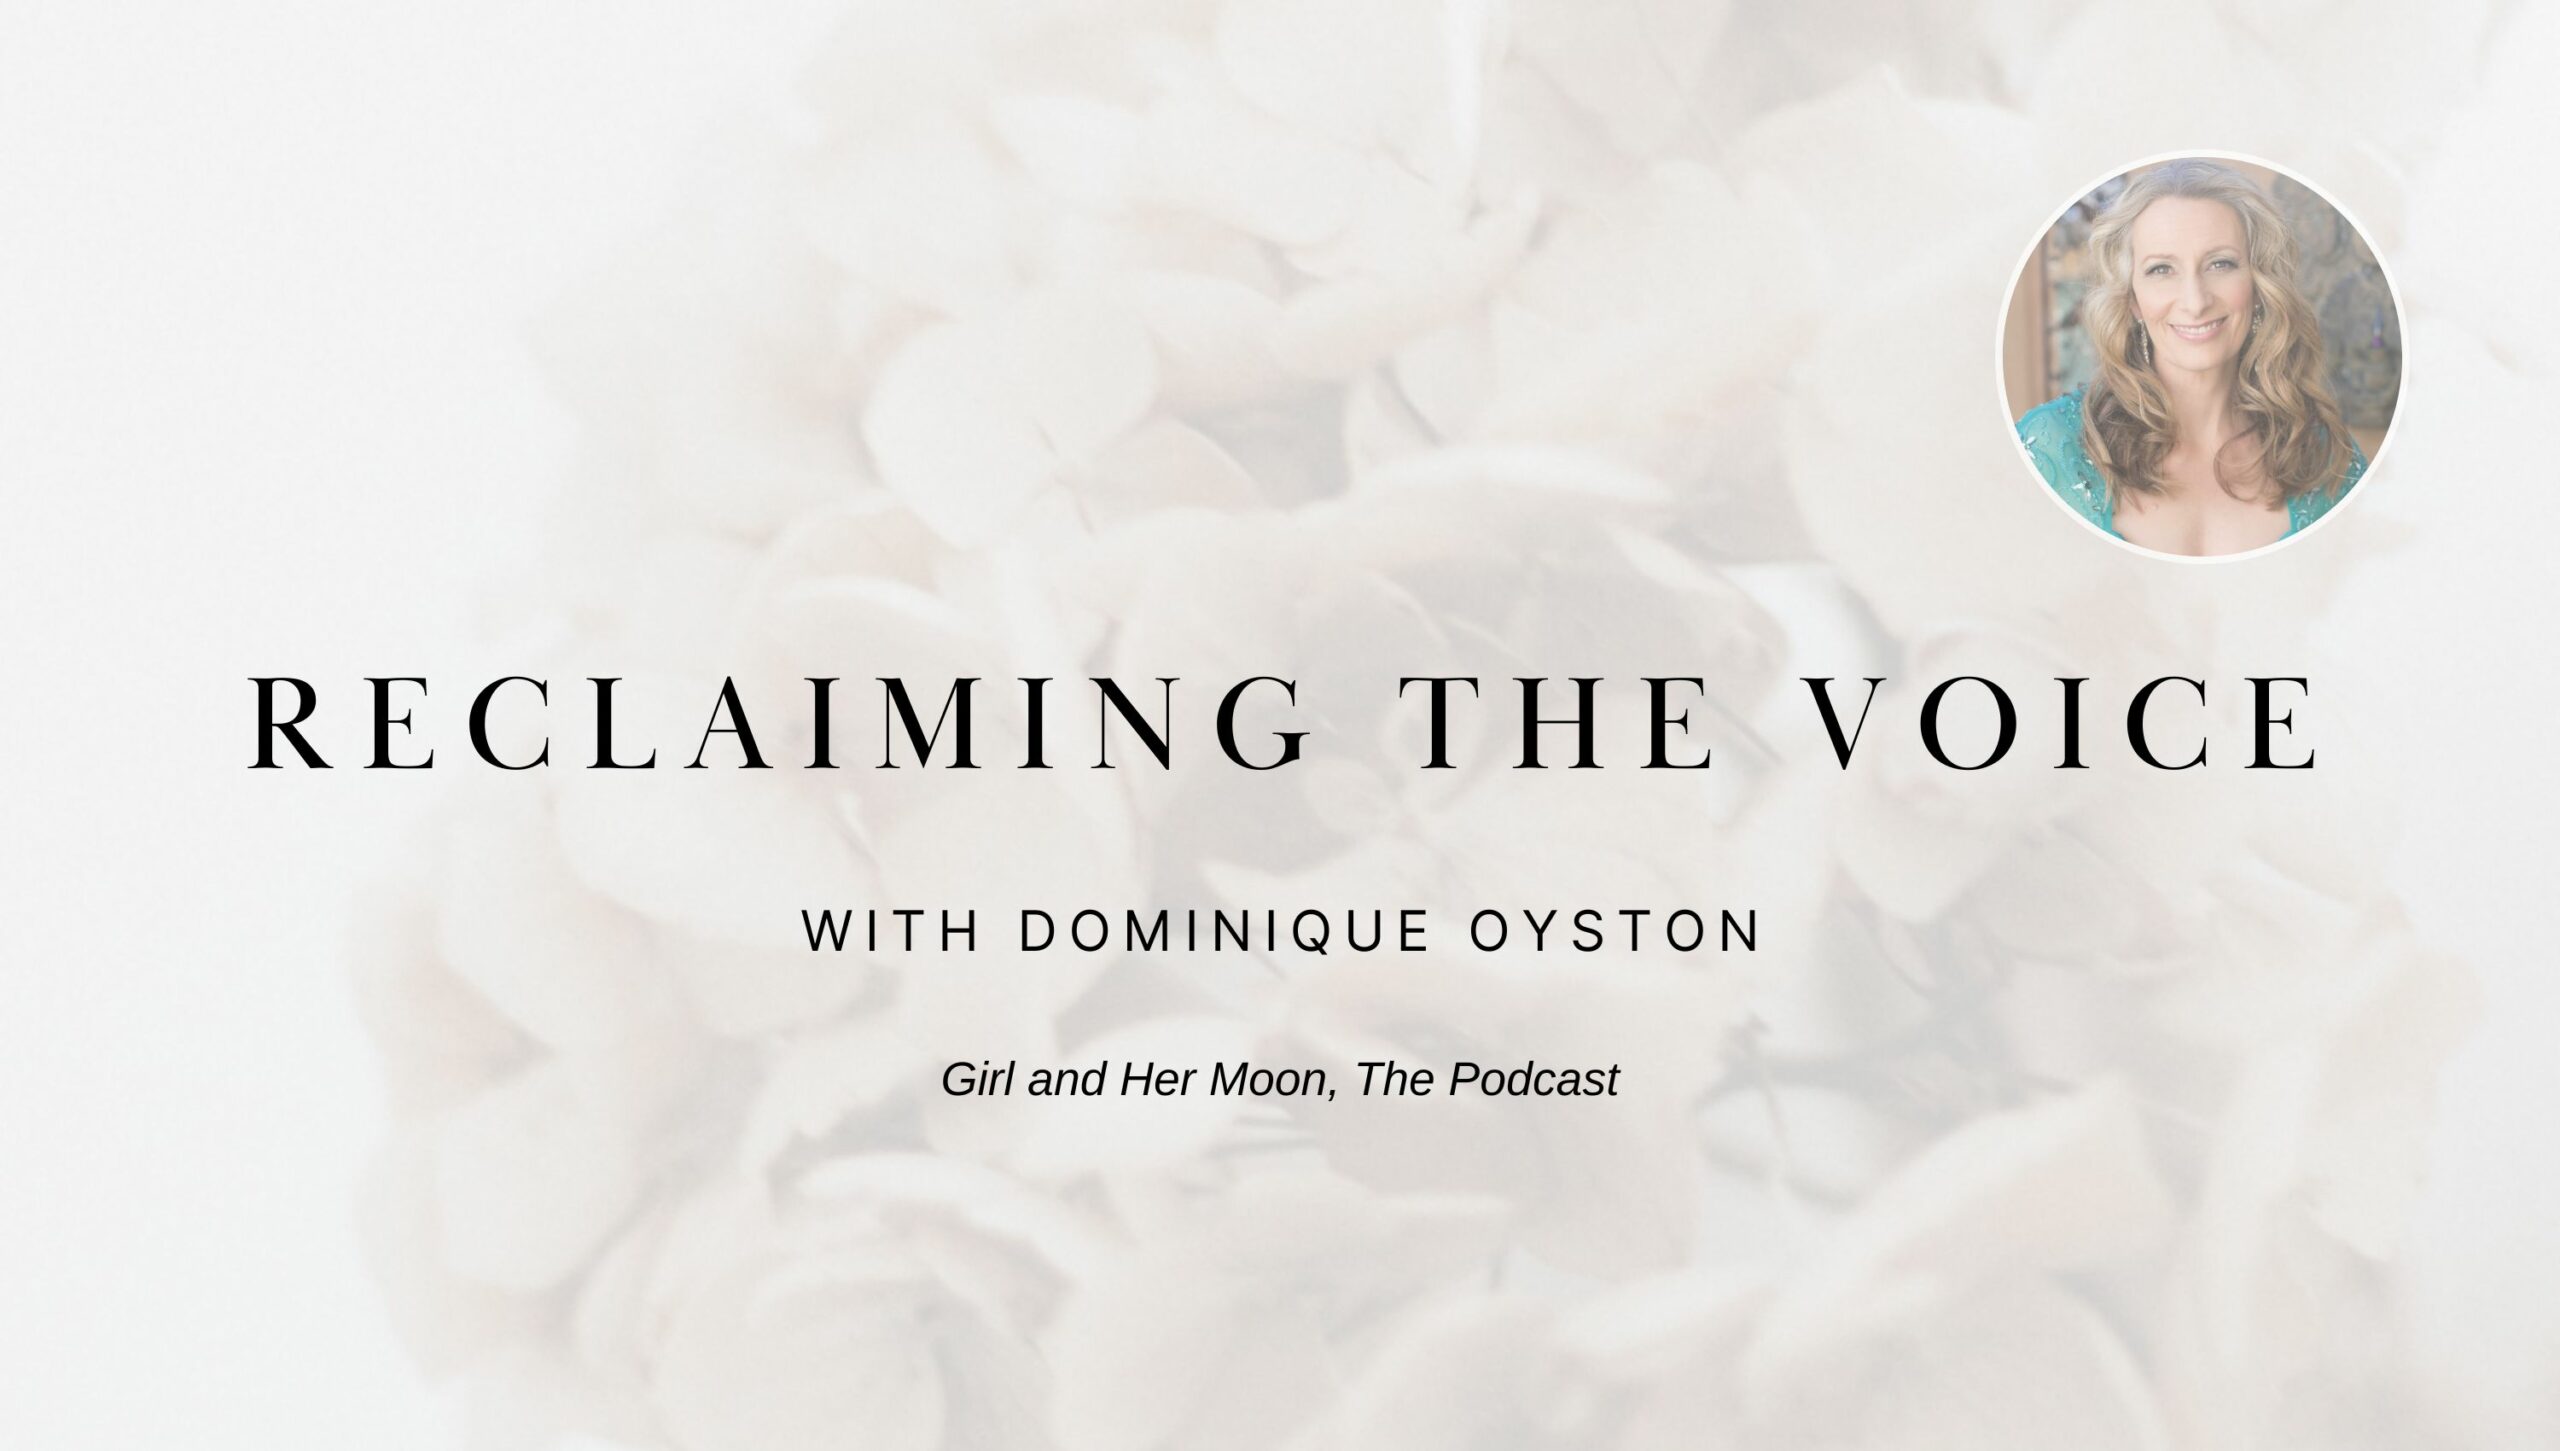 Reclaiming the Voice with Dominique Oyston Girl and Her moon the Podcast